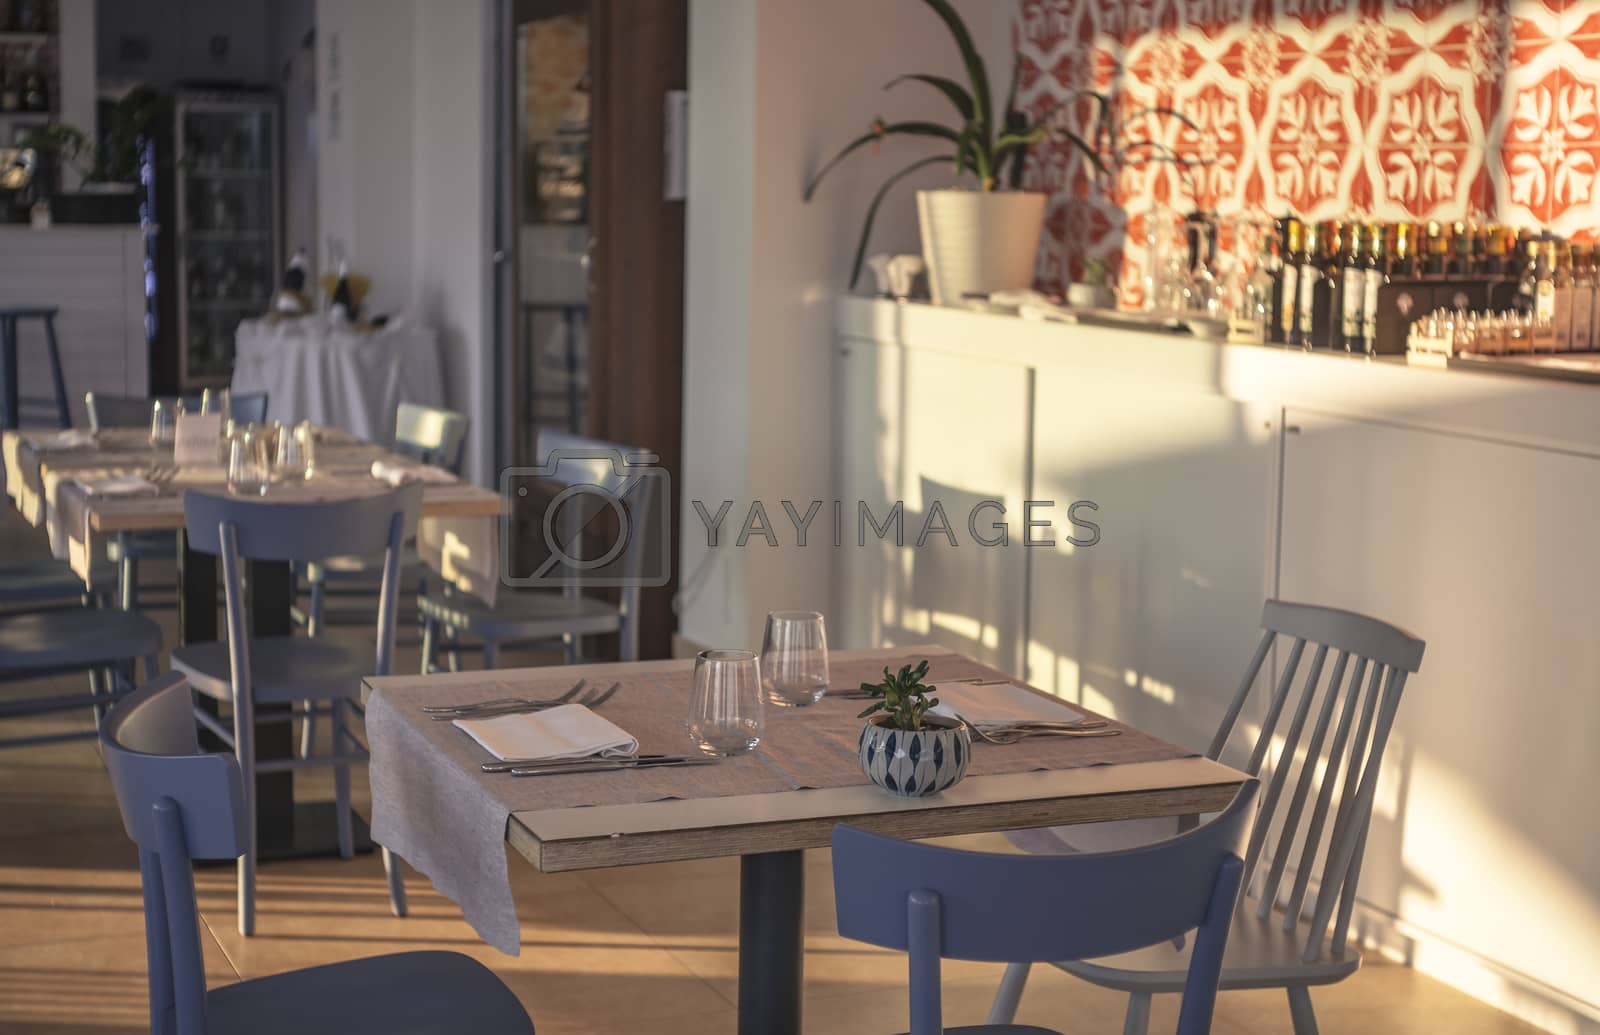 Royalty free image of Restaurant tables by pippocarlot